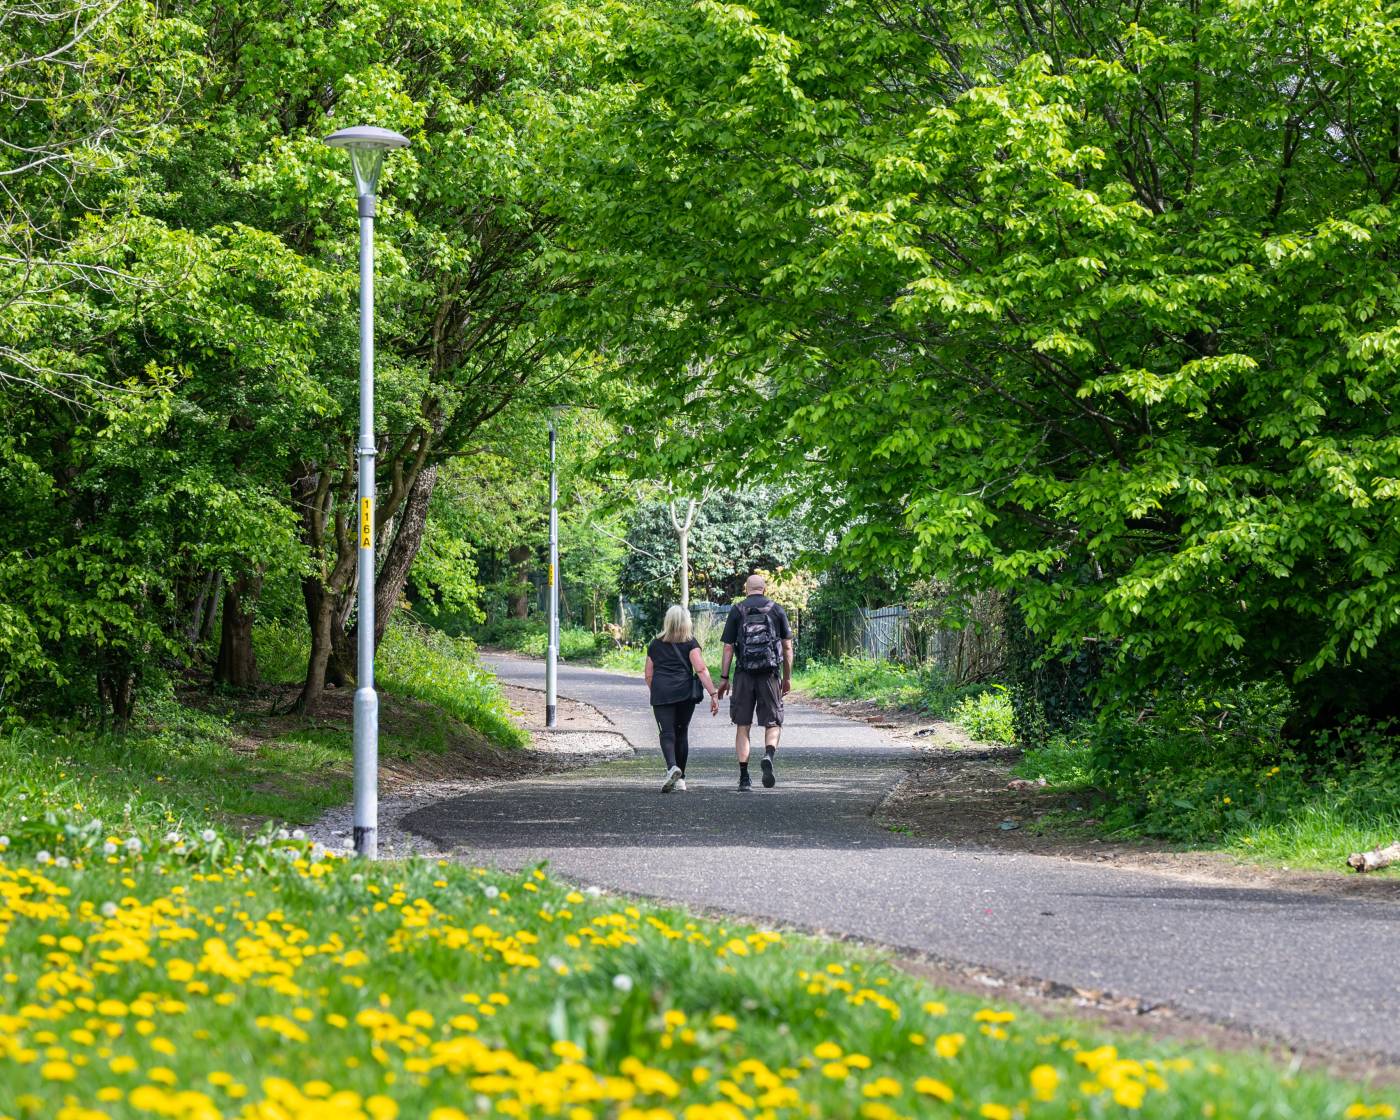 A couple walking along the greenway